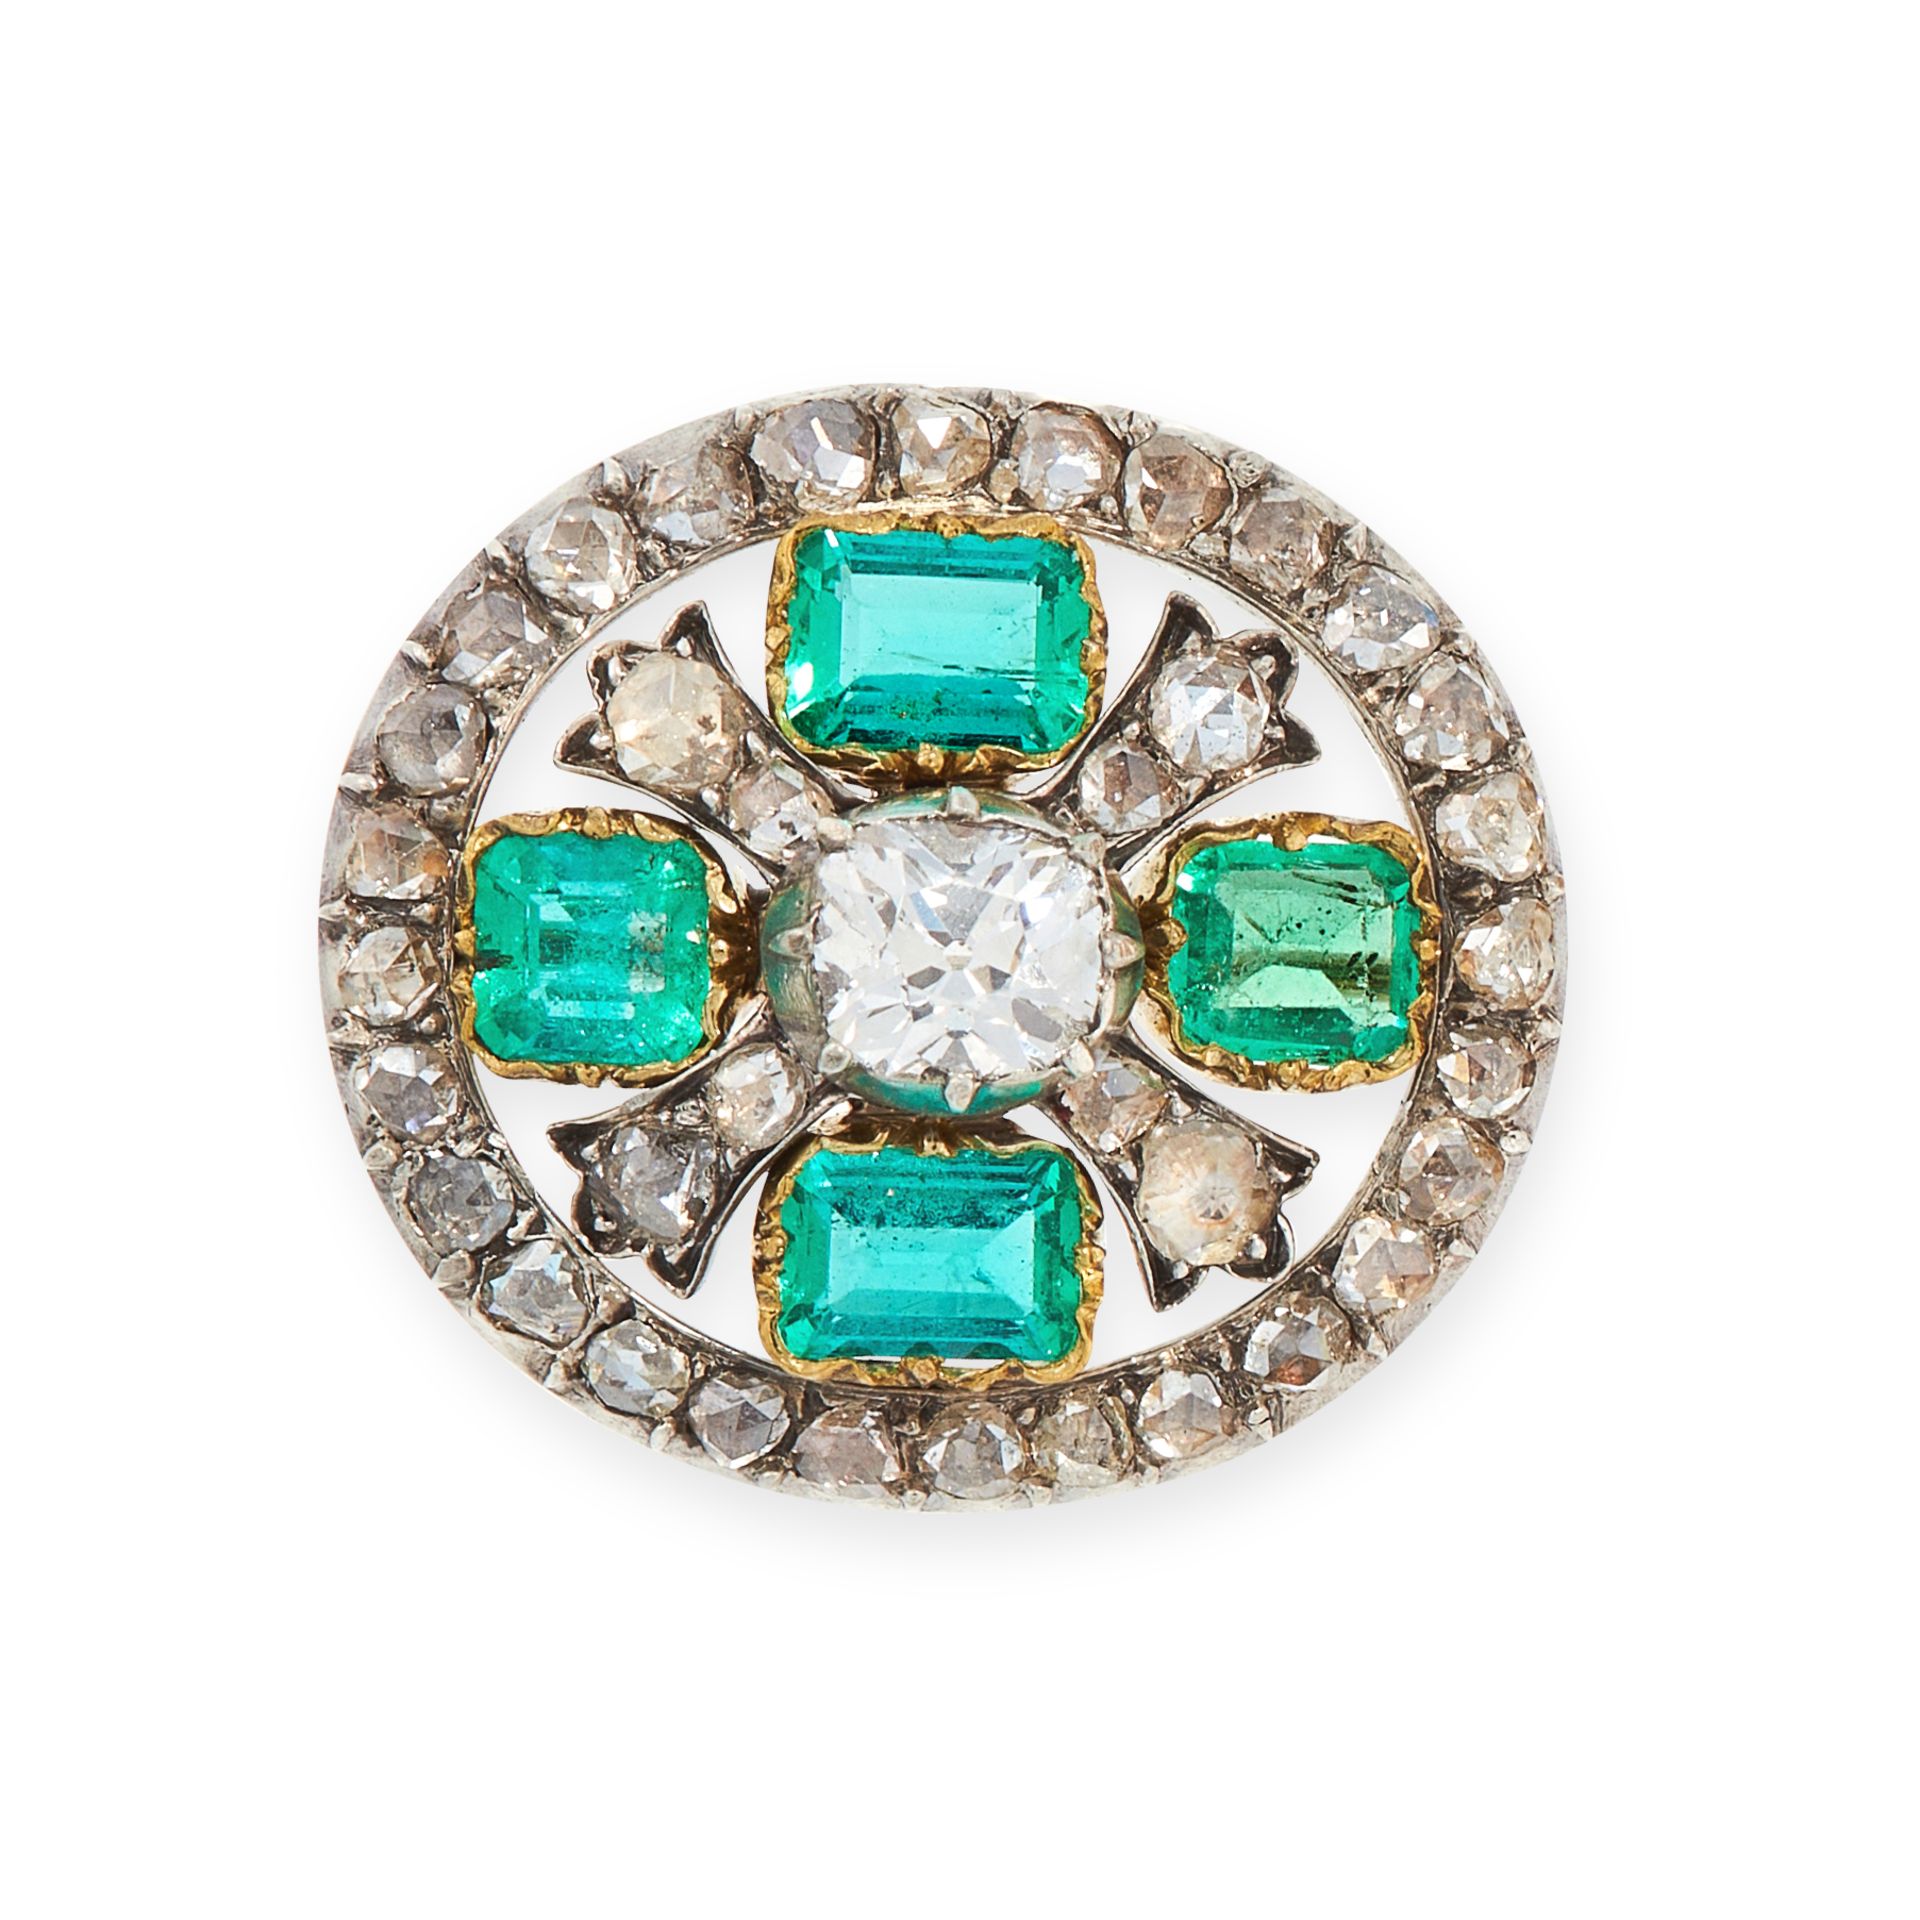 AN ANTIQUE EMERALD AND DIAMOND BROOCH, 19TH CENTURY in yellow gold and silver, set with a central